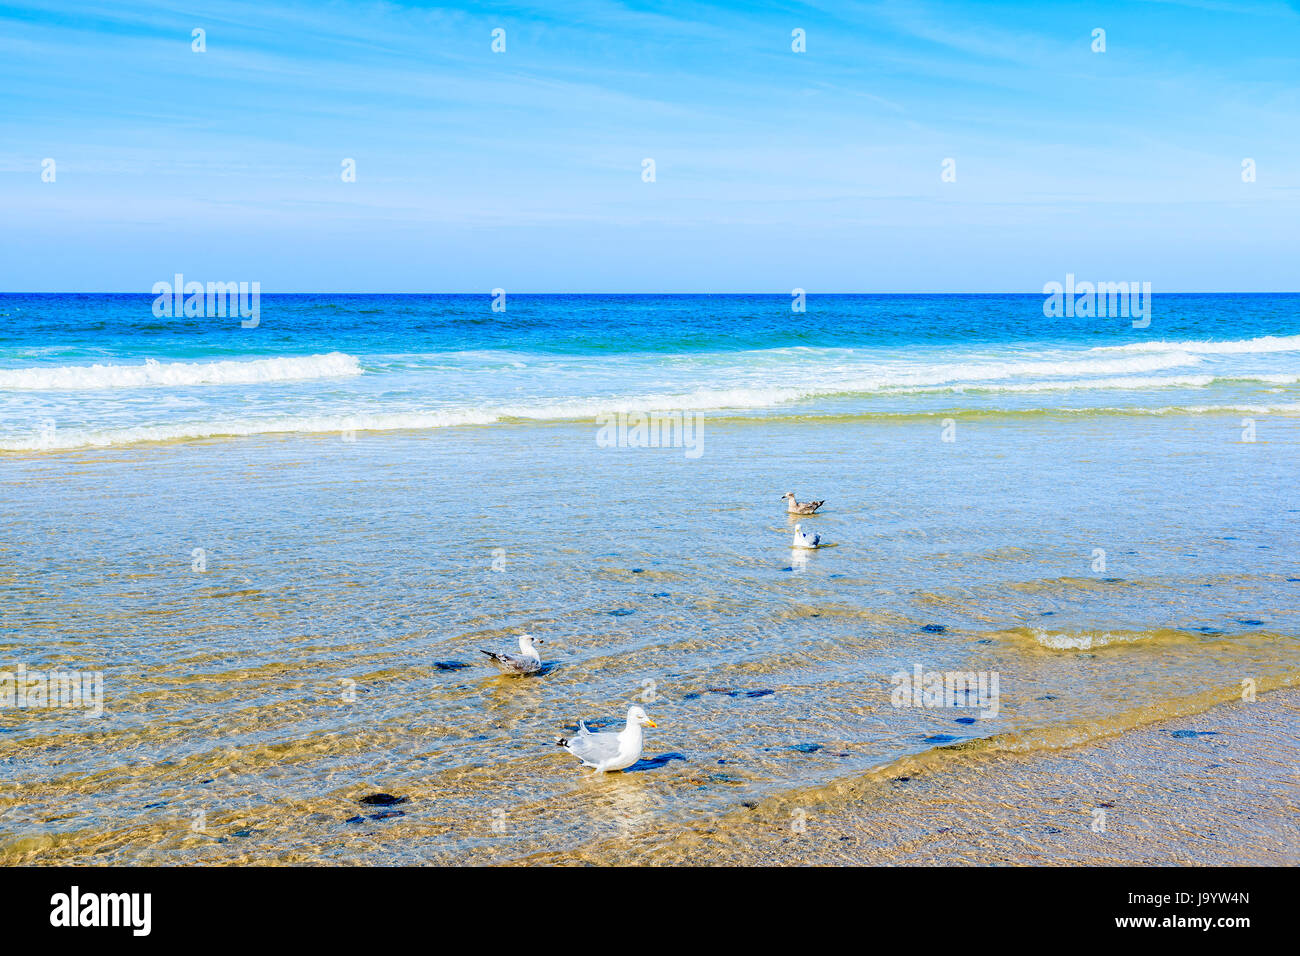 Seagulls in water on Kampen beach, Sylt island, North Sea, Germany Stock Photo